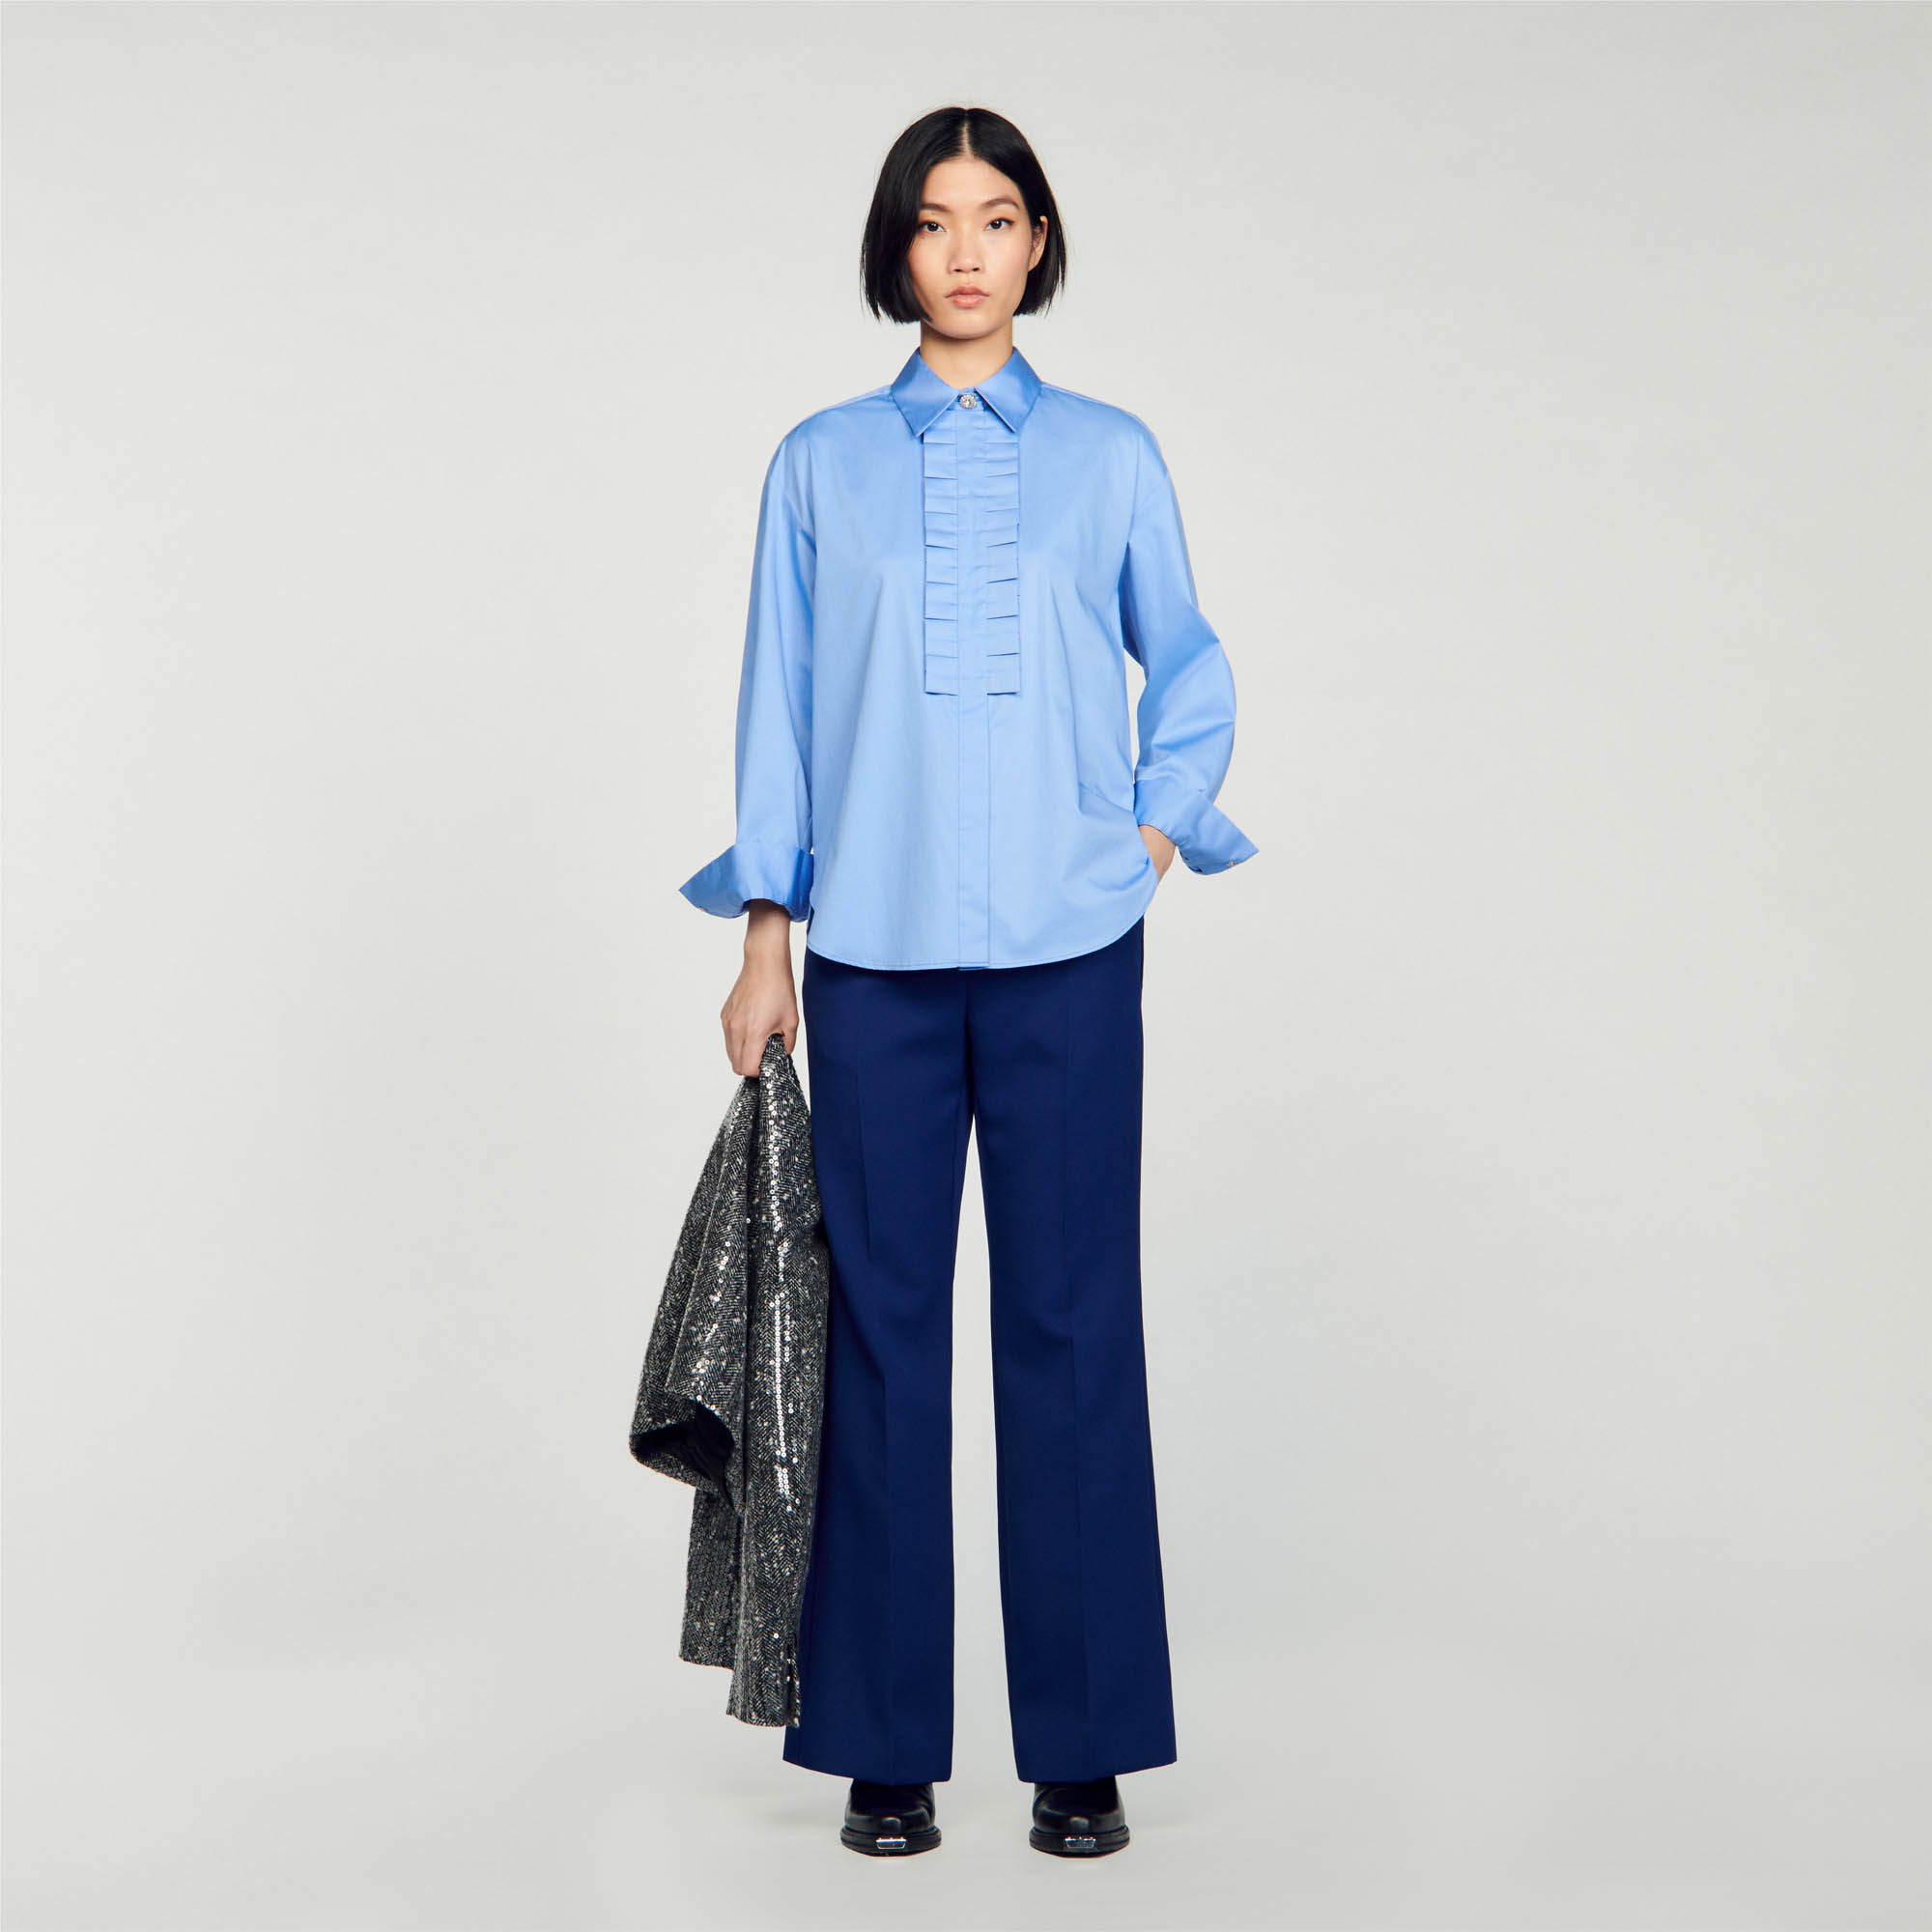 Sandro cotton Buttons: A long, straight-fit poplin shirt with a ruffled collar, long sleeves adorned with jewellery buttons on the cuffs and a covered button placket